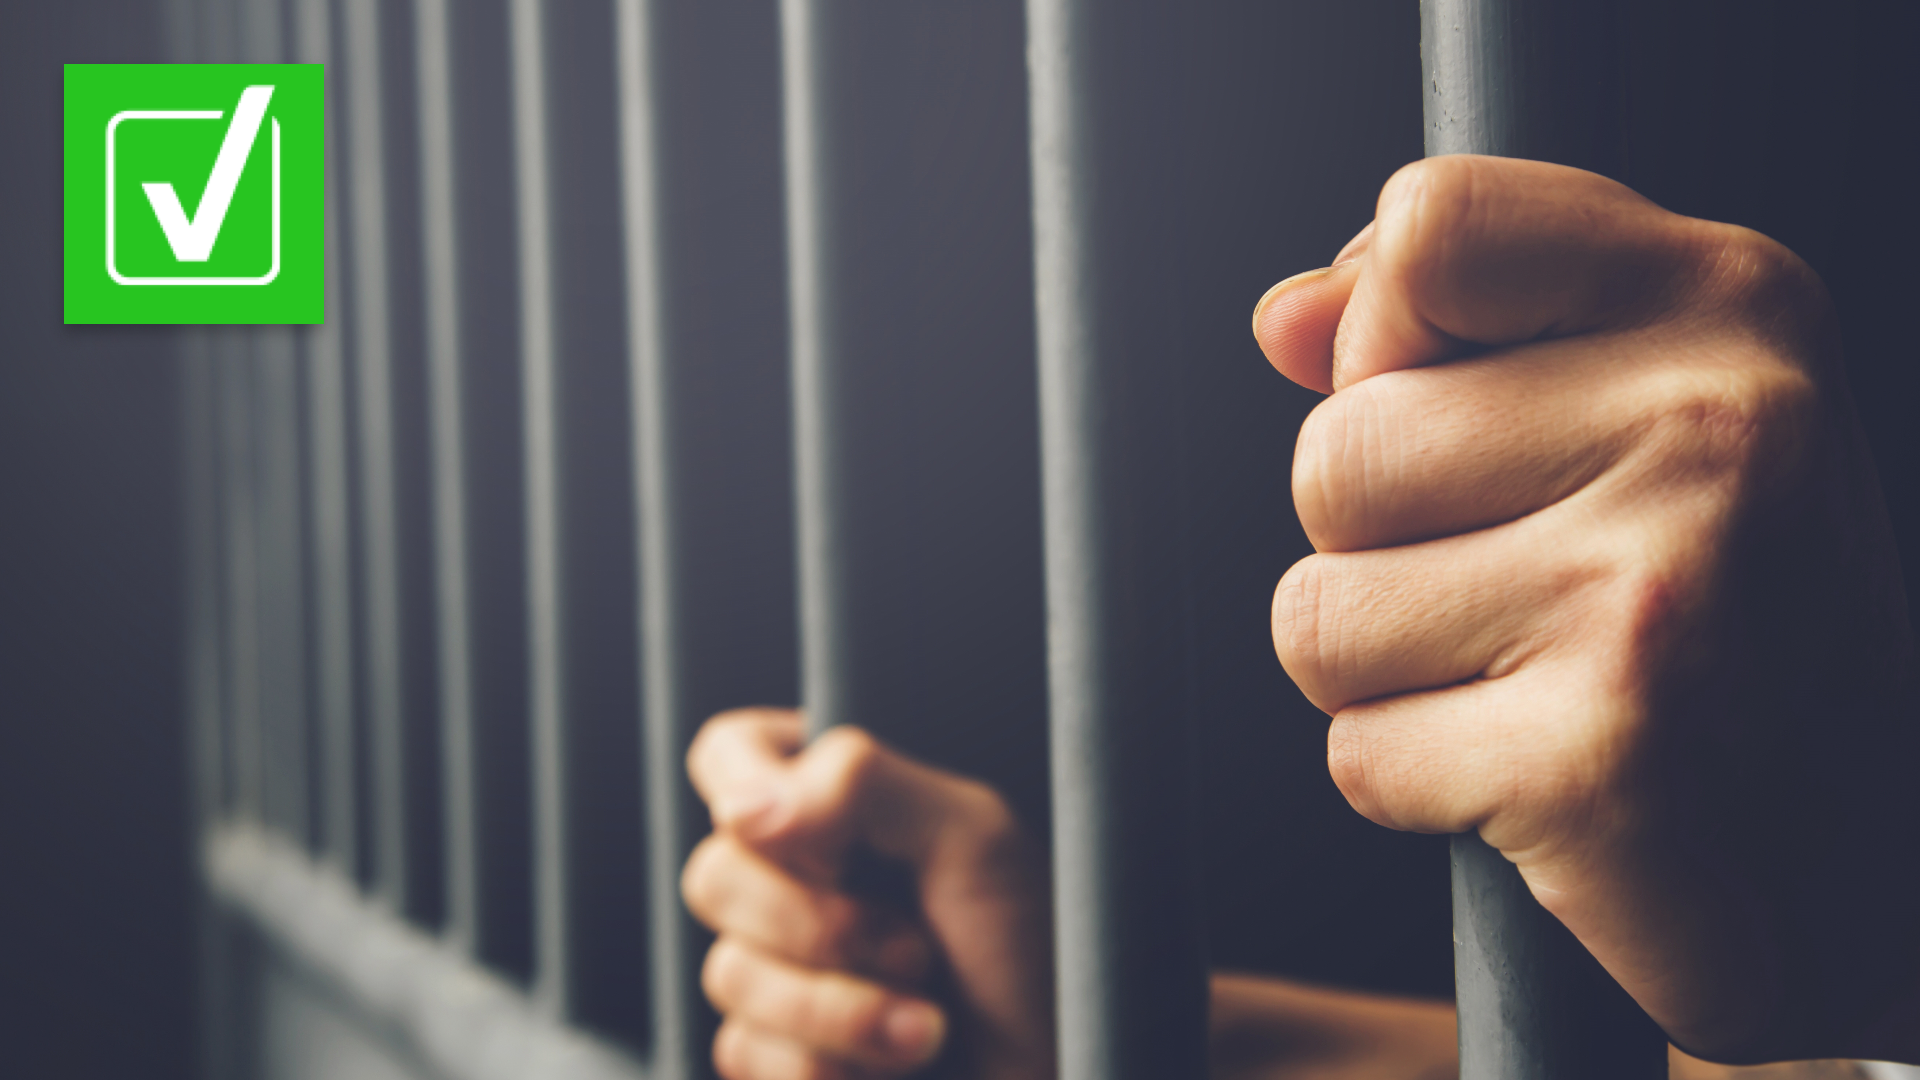 28 women have filed lawsuits alleging they were sexually assaulted by incarcerated men after a former employee gave the men keys to the female dorms.